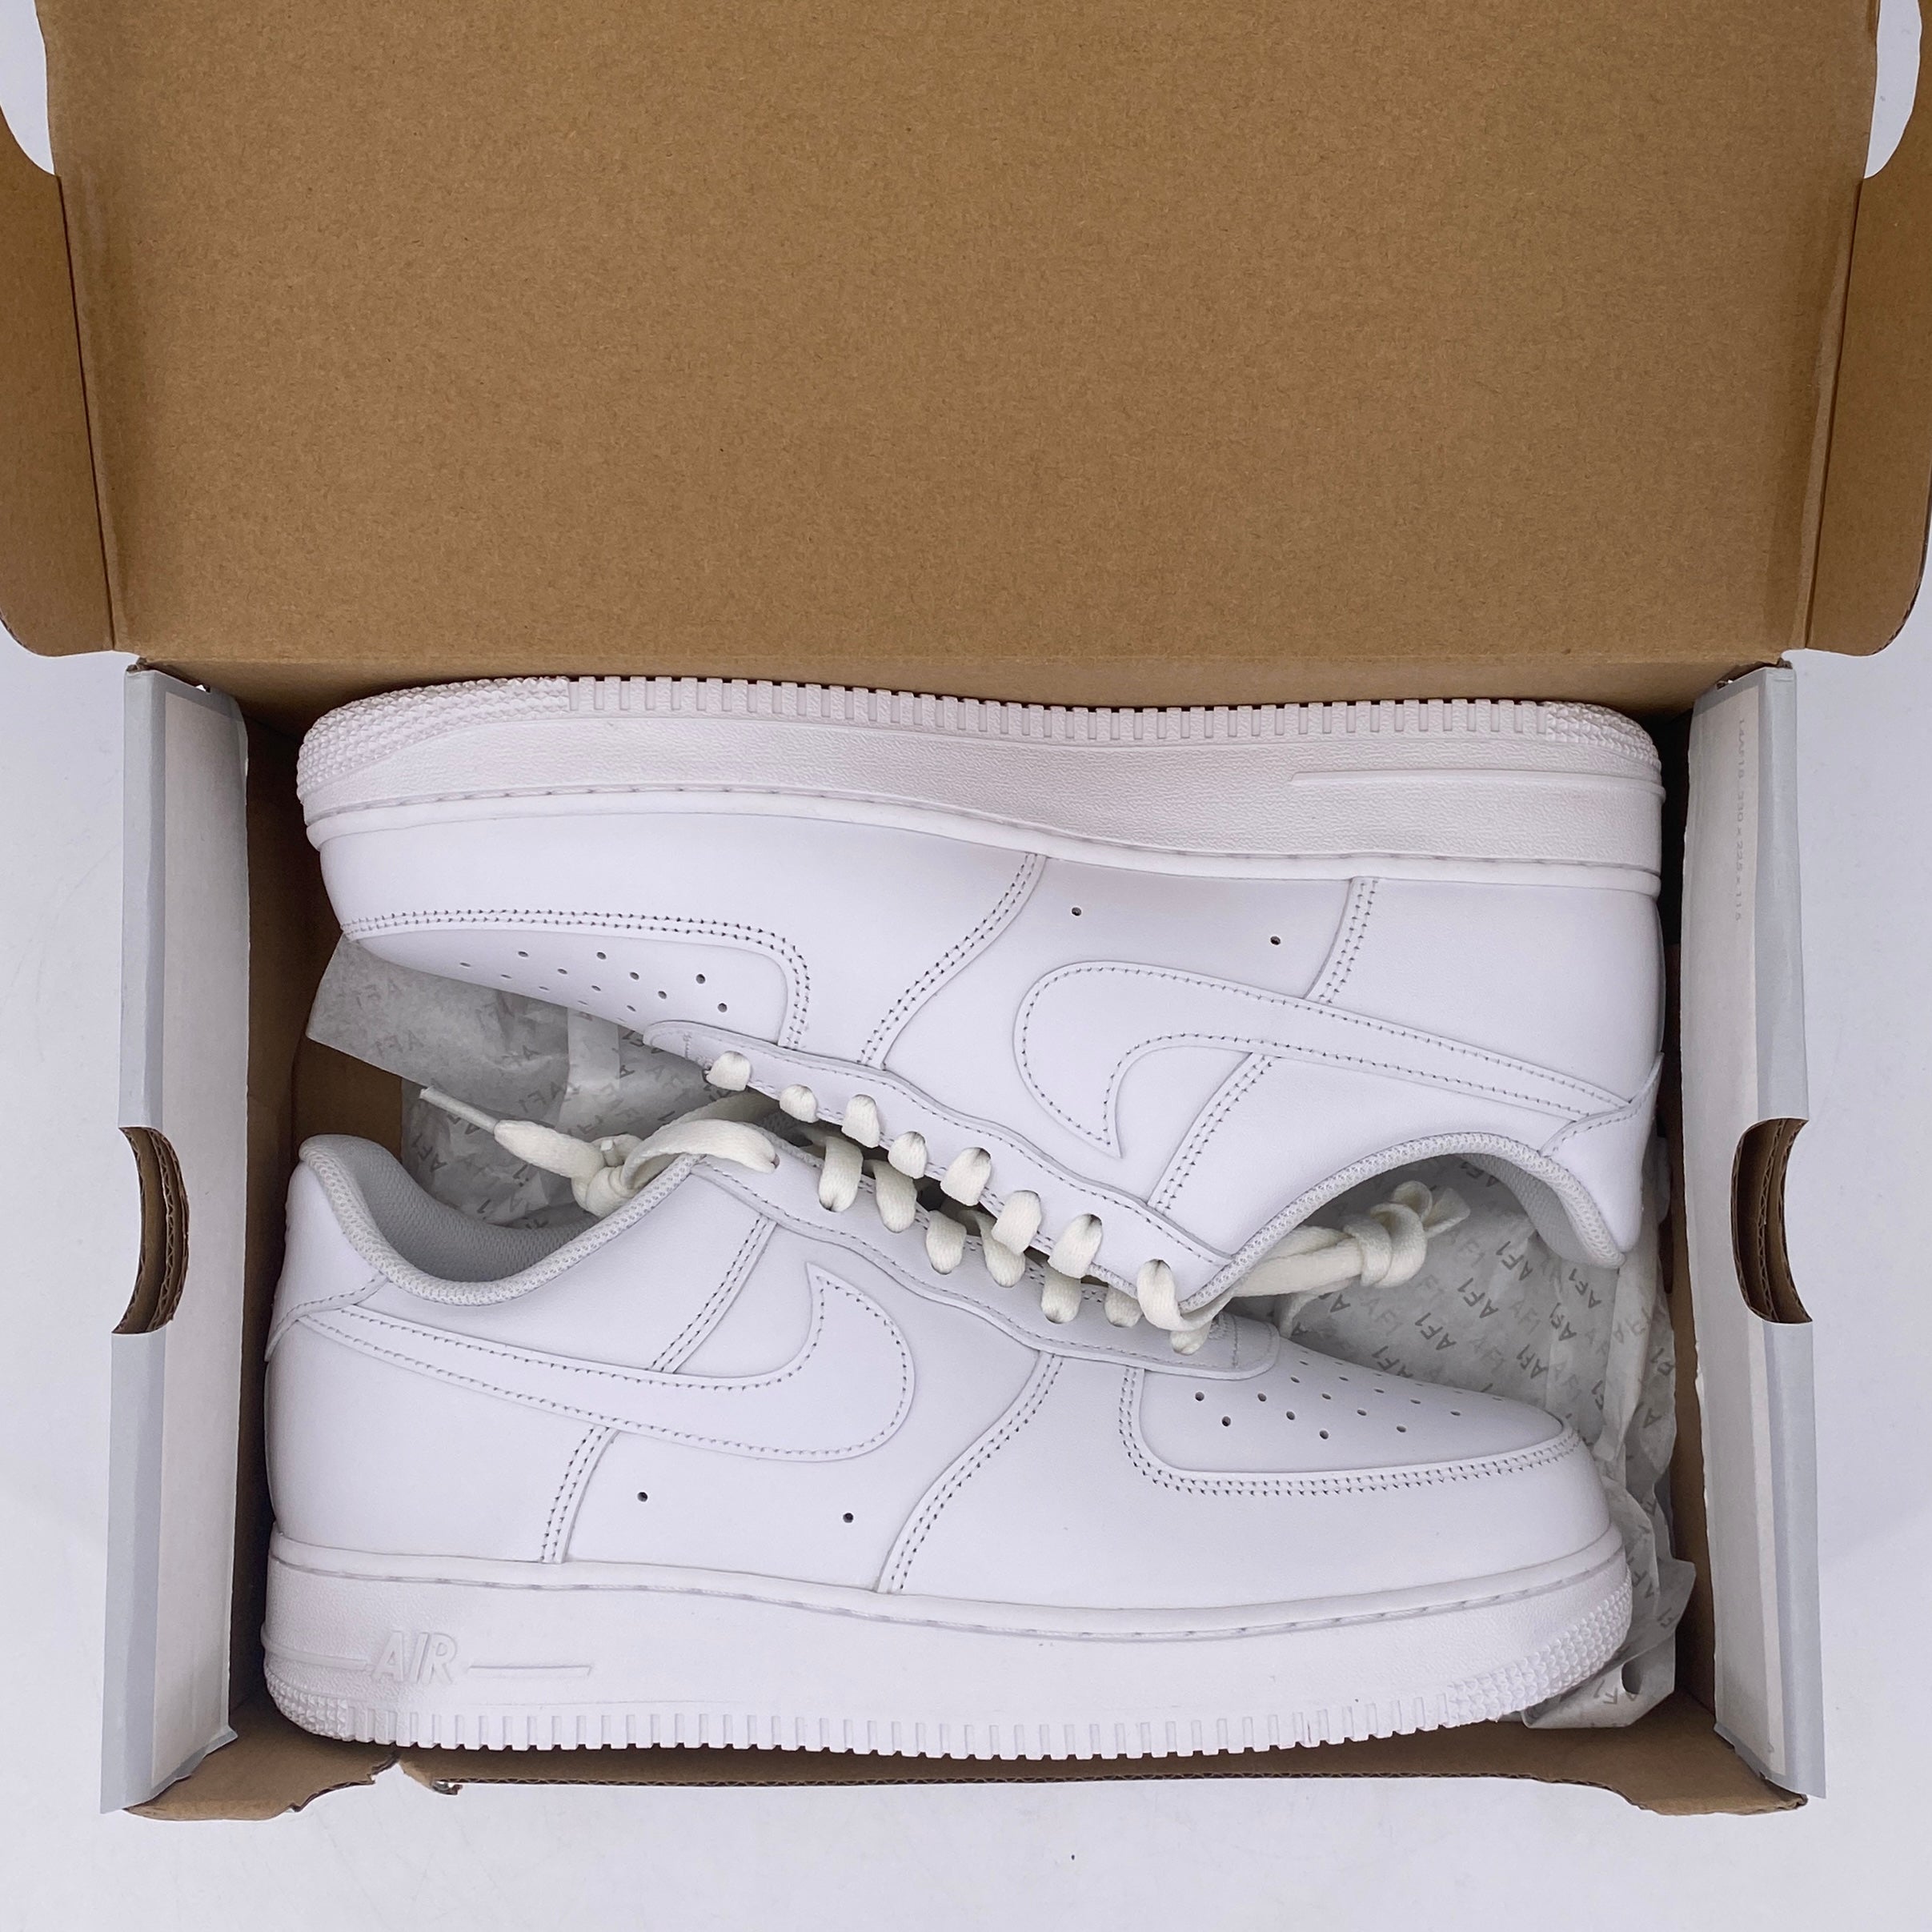 Nike Air Force 1 Low &quot;White&quot; 2021 New Size 10.5